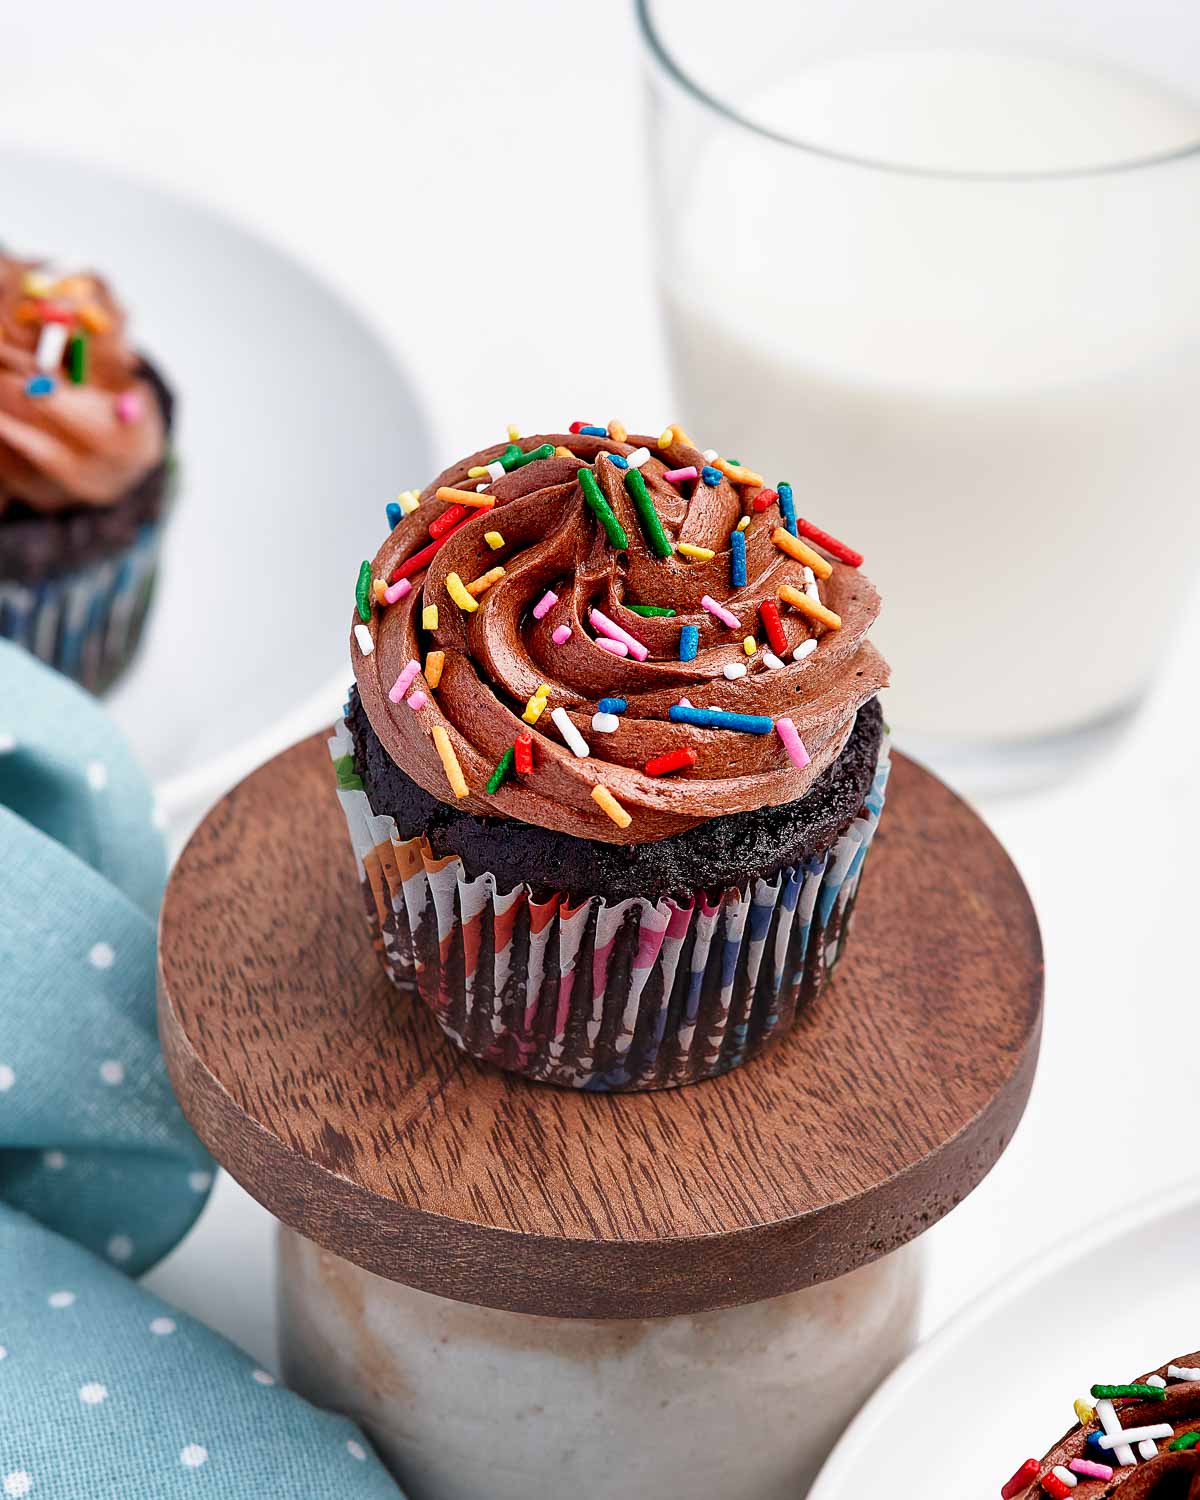 Chocolate cupcake with chocolate swirled frosting and sprinkles.